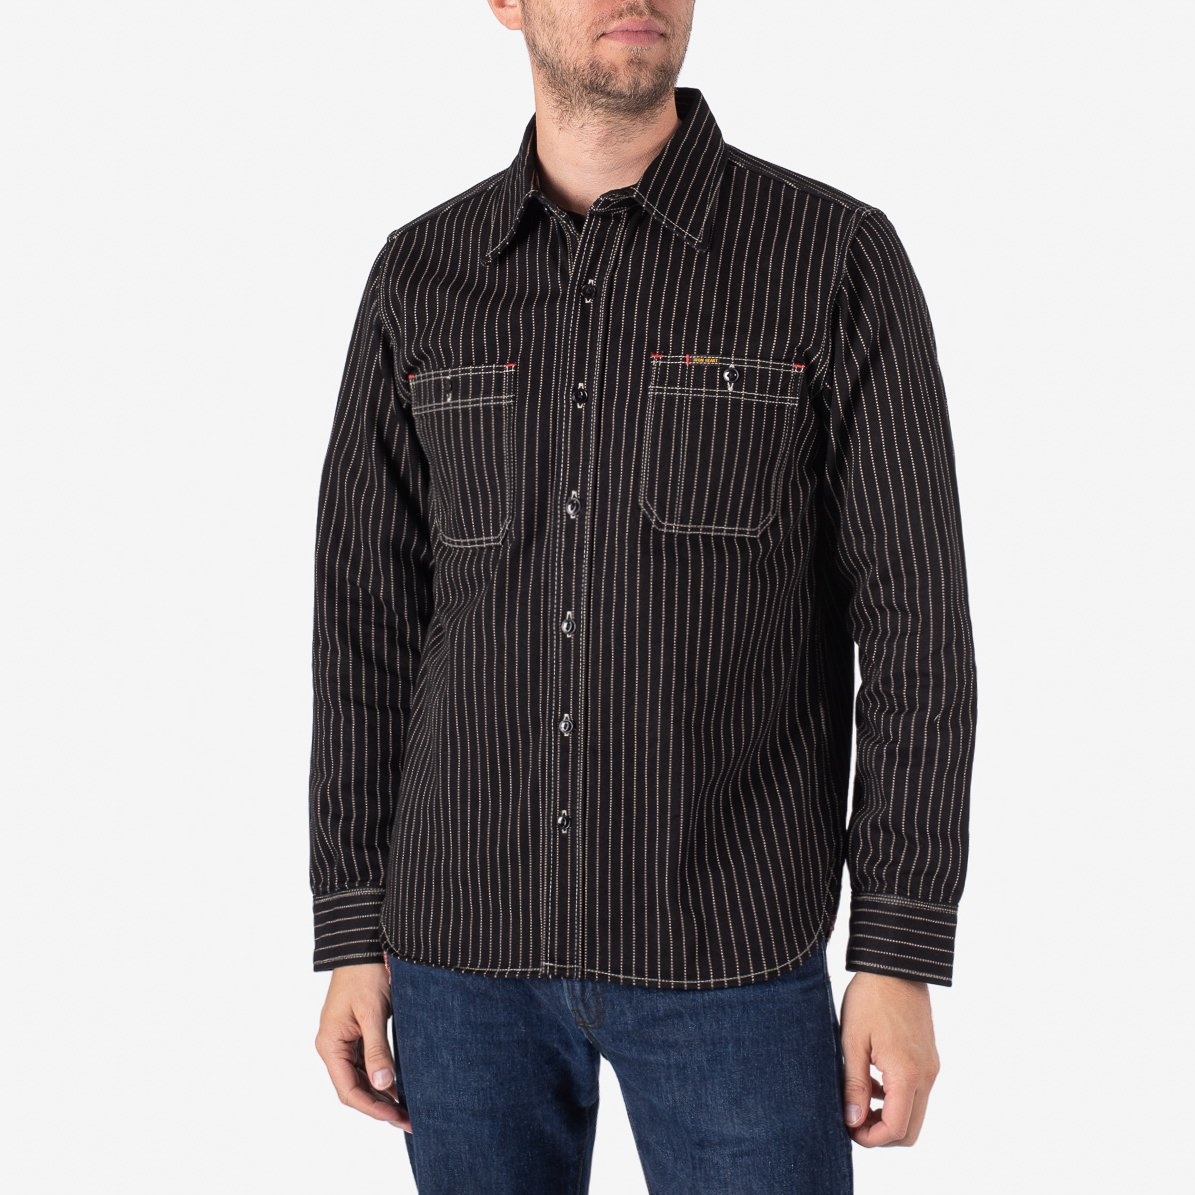 IHSH-266-BLK 12oz Wabash Work Shirt - Black with Black Buttons - 2